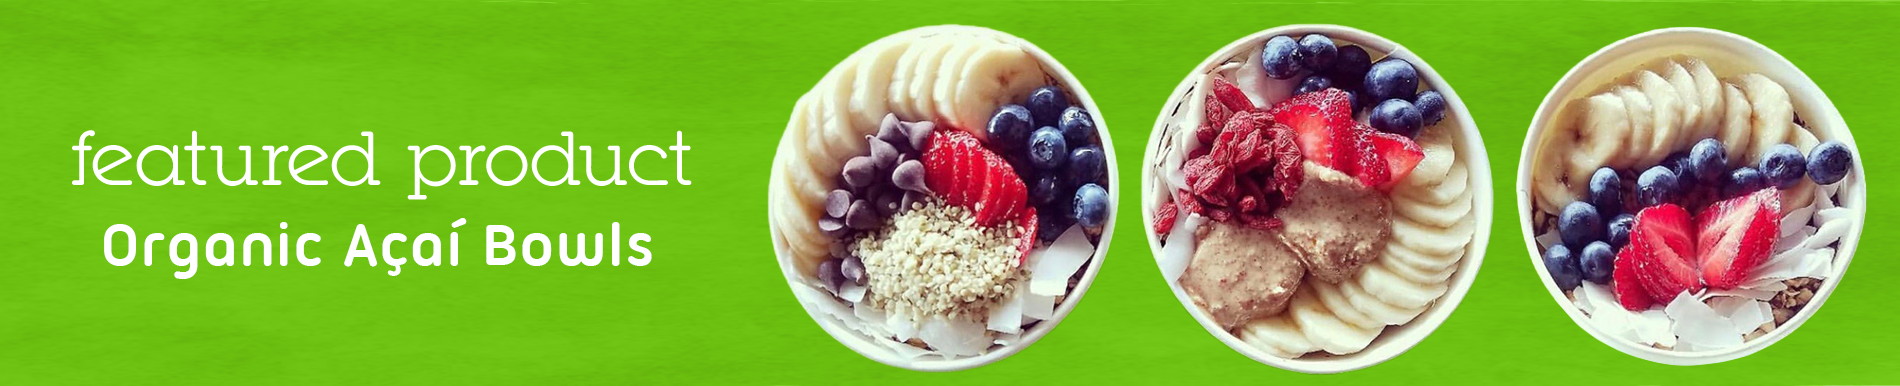 Featured Product - organic acai bowls